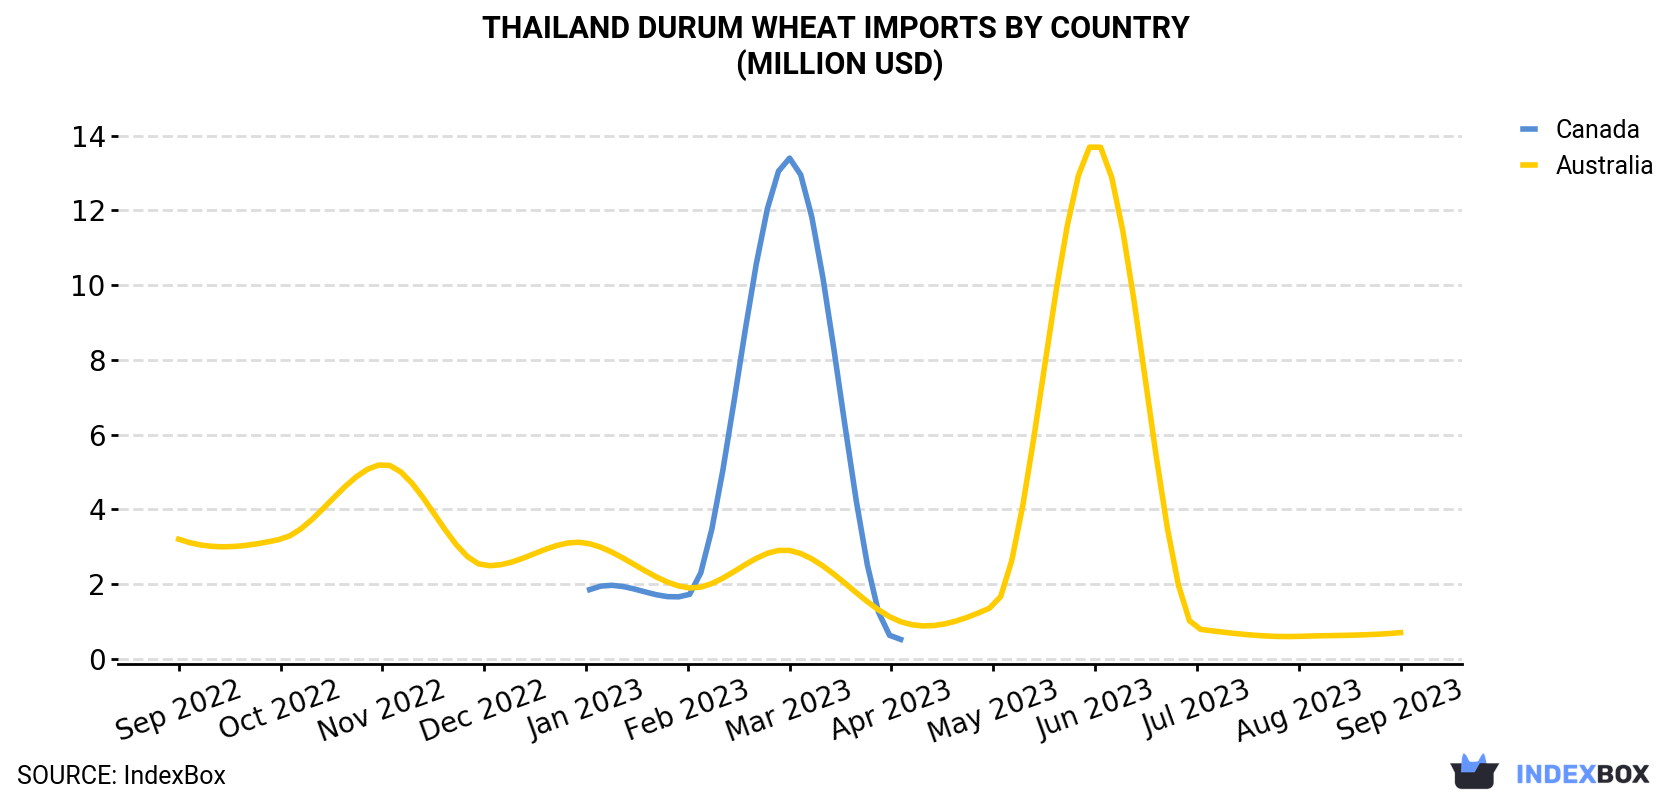 Thailand Durum Wheat Imports By Country (Million USD)